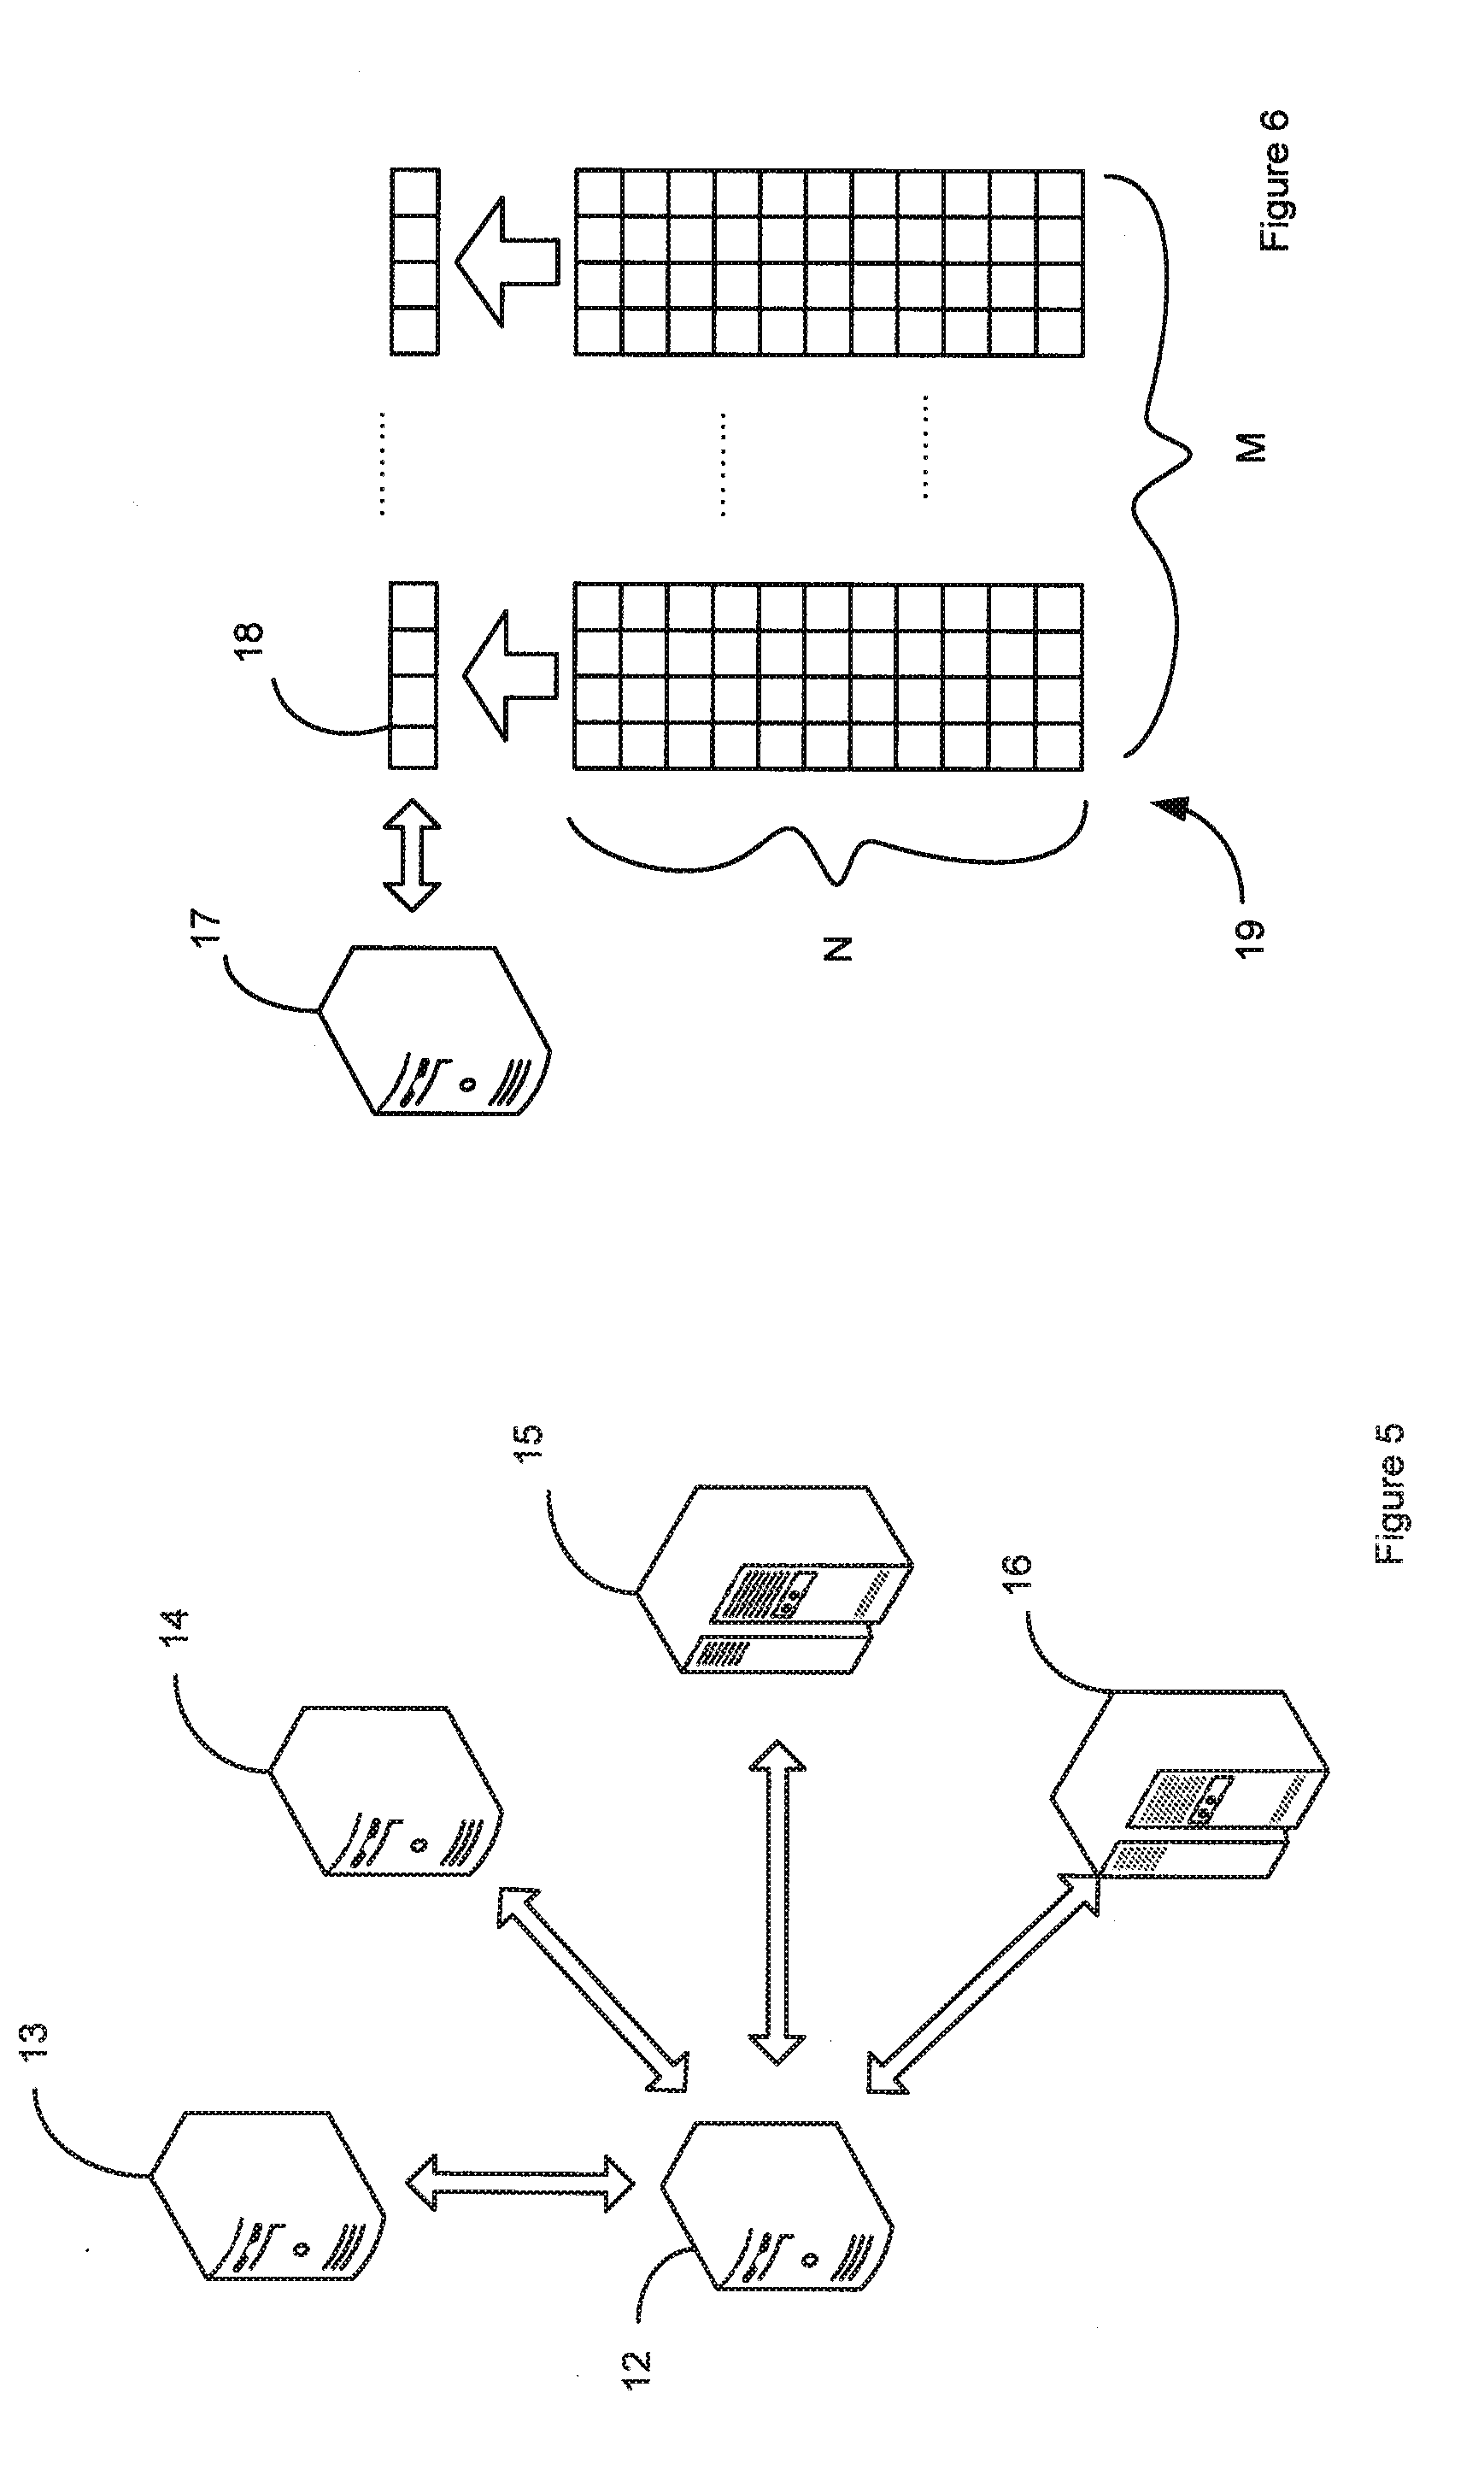 Method and system for evaluating sequences